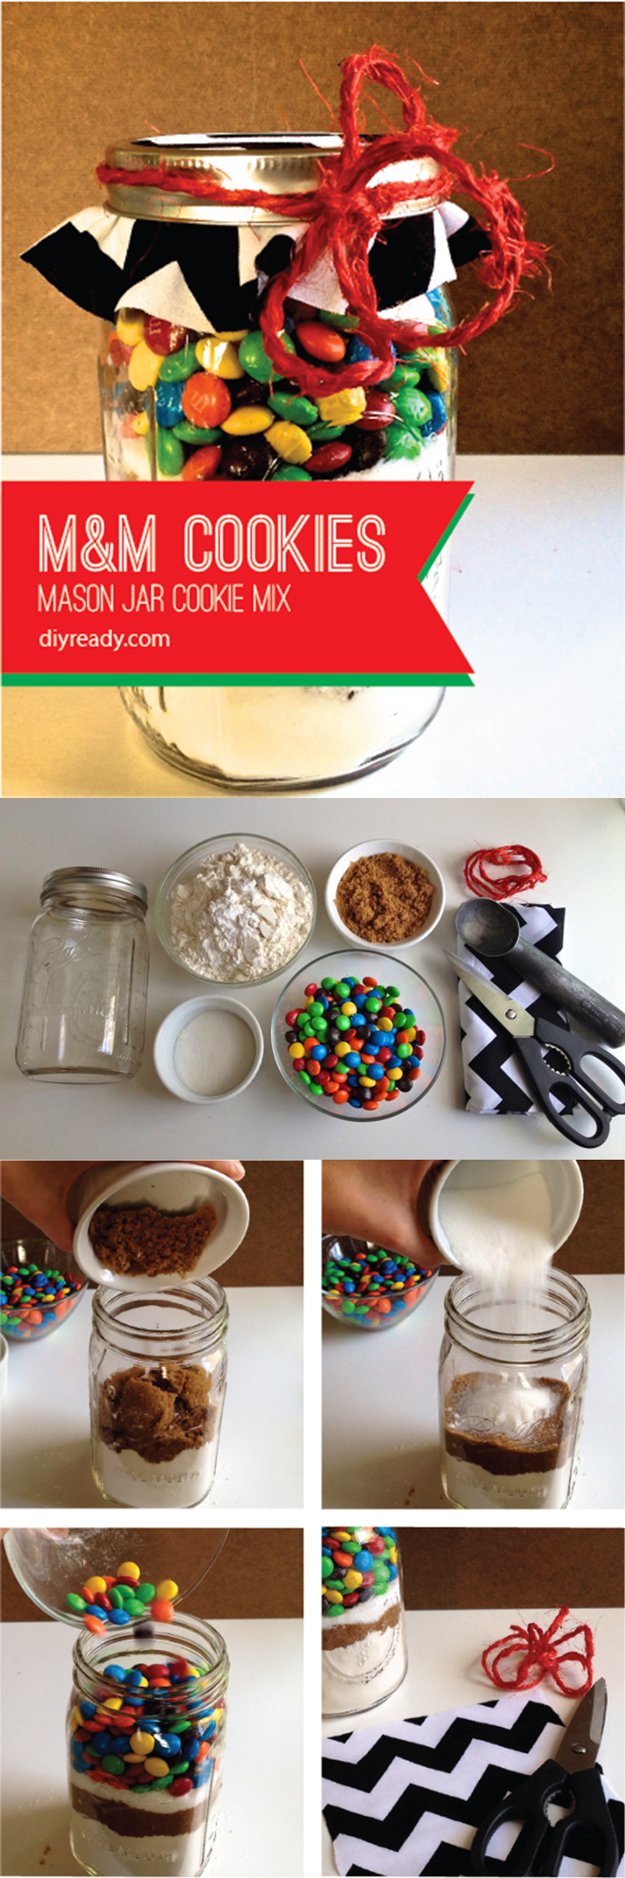 Mason Jar Cookie Recipes - fun mnm cookies in a jar | | 26 DIY Mason Jar Crafts You Can Make In Under an Hour at http://DIY Projects/com/mason-jar-crafts-in-under-an-hour